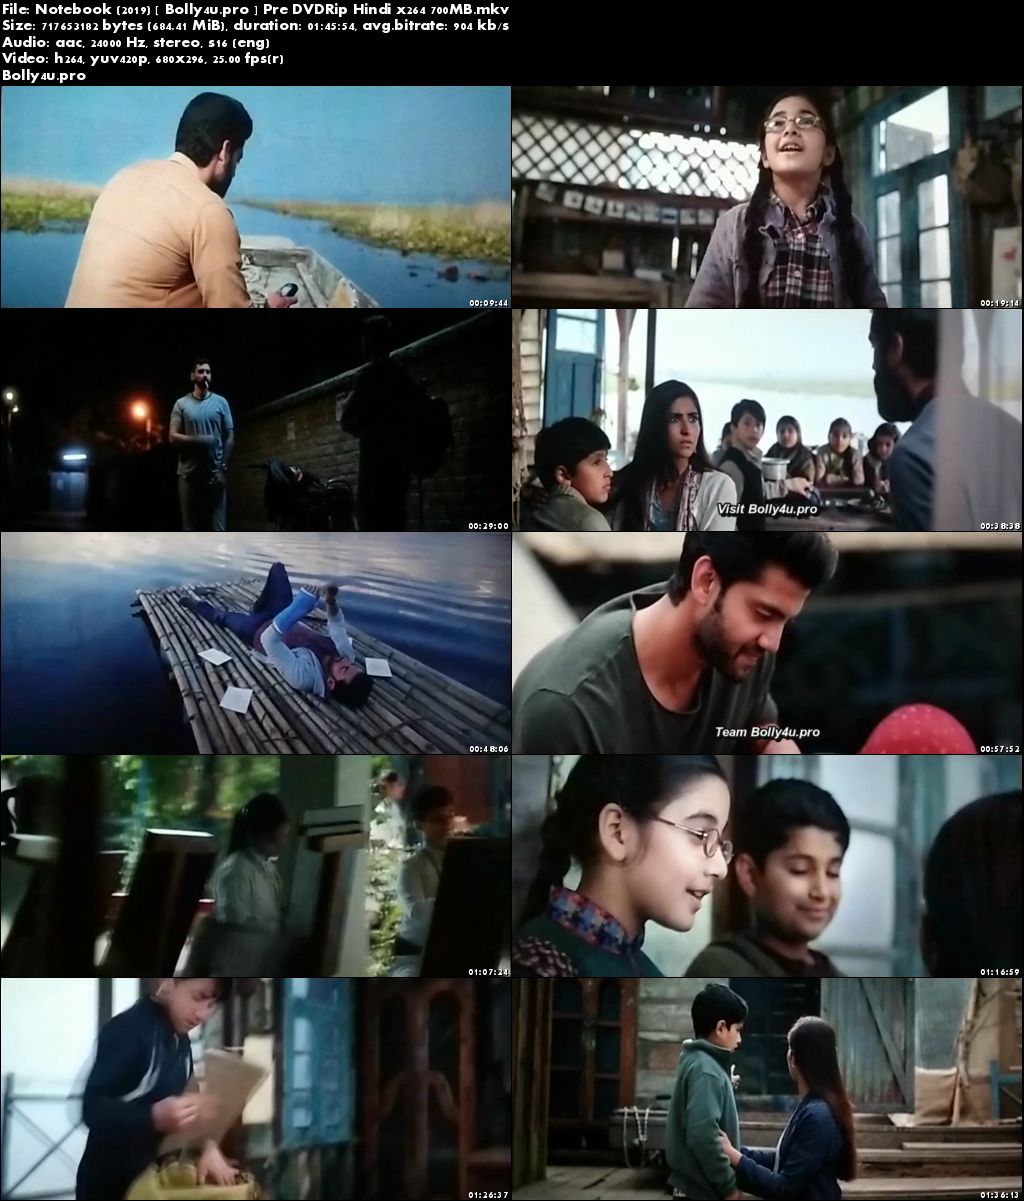 Notebook 2019 Pre DVDRip 300Mb Full Hindi Movie Download x264